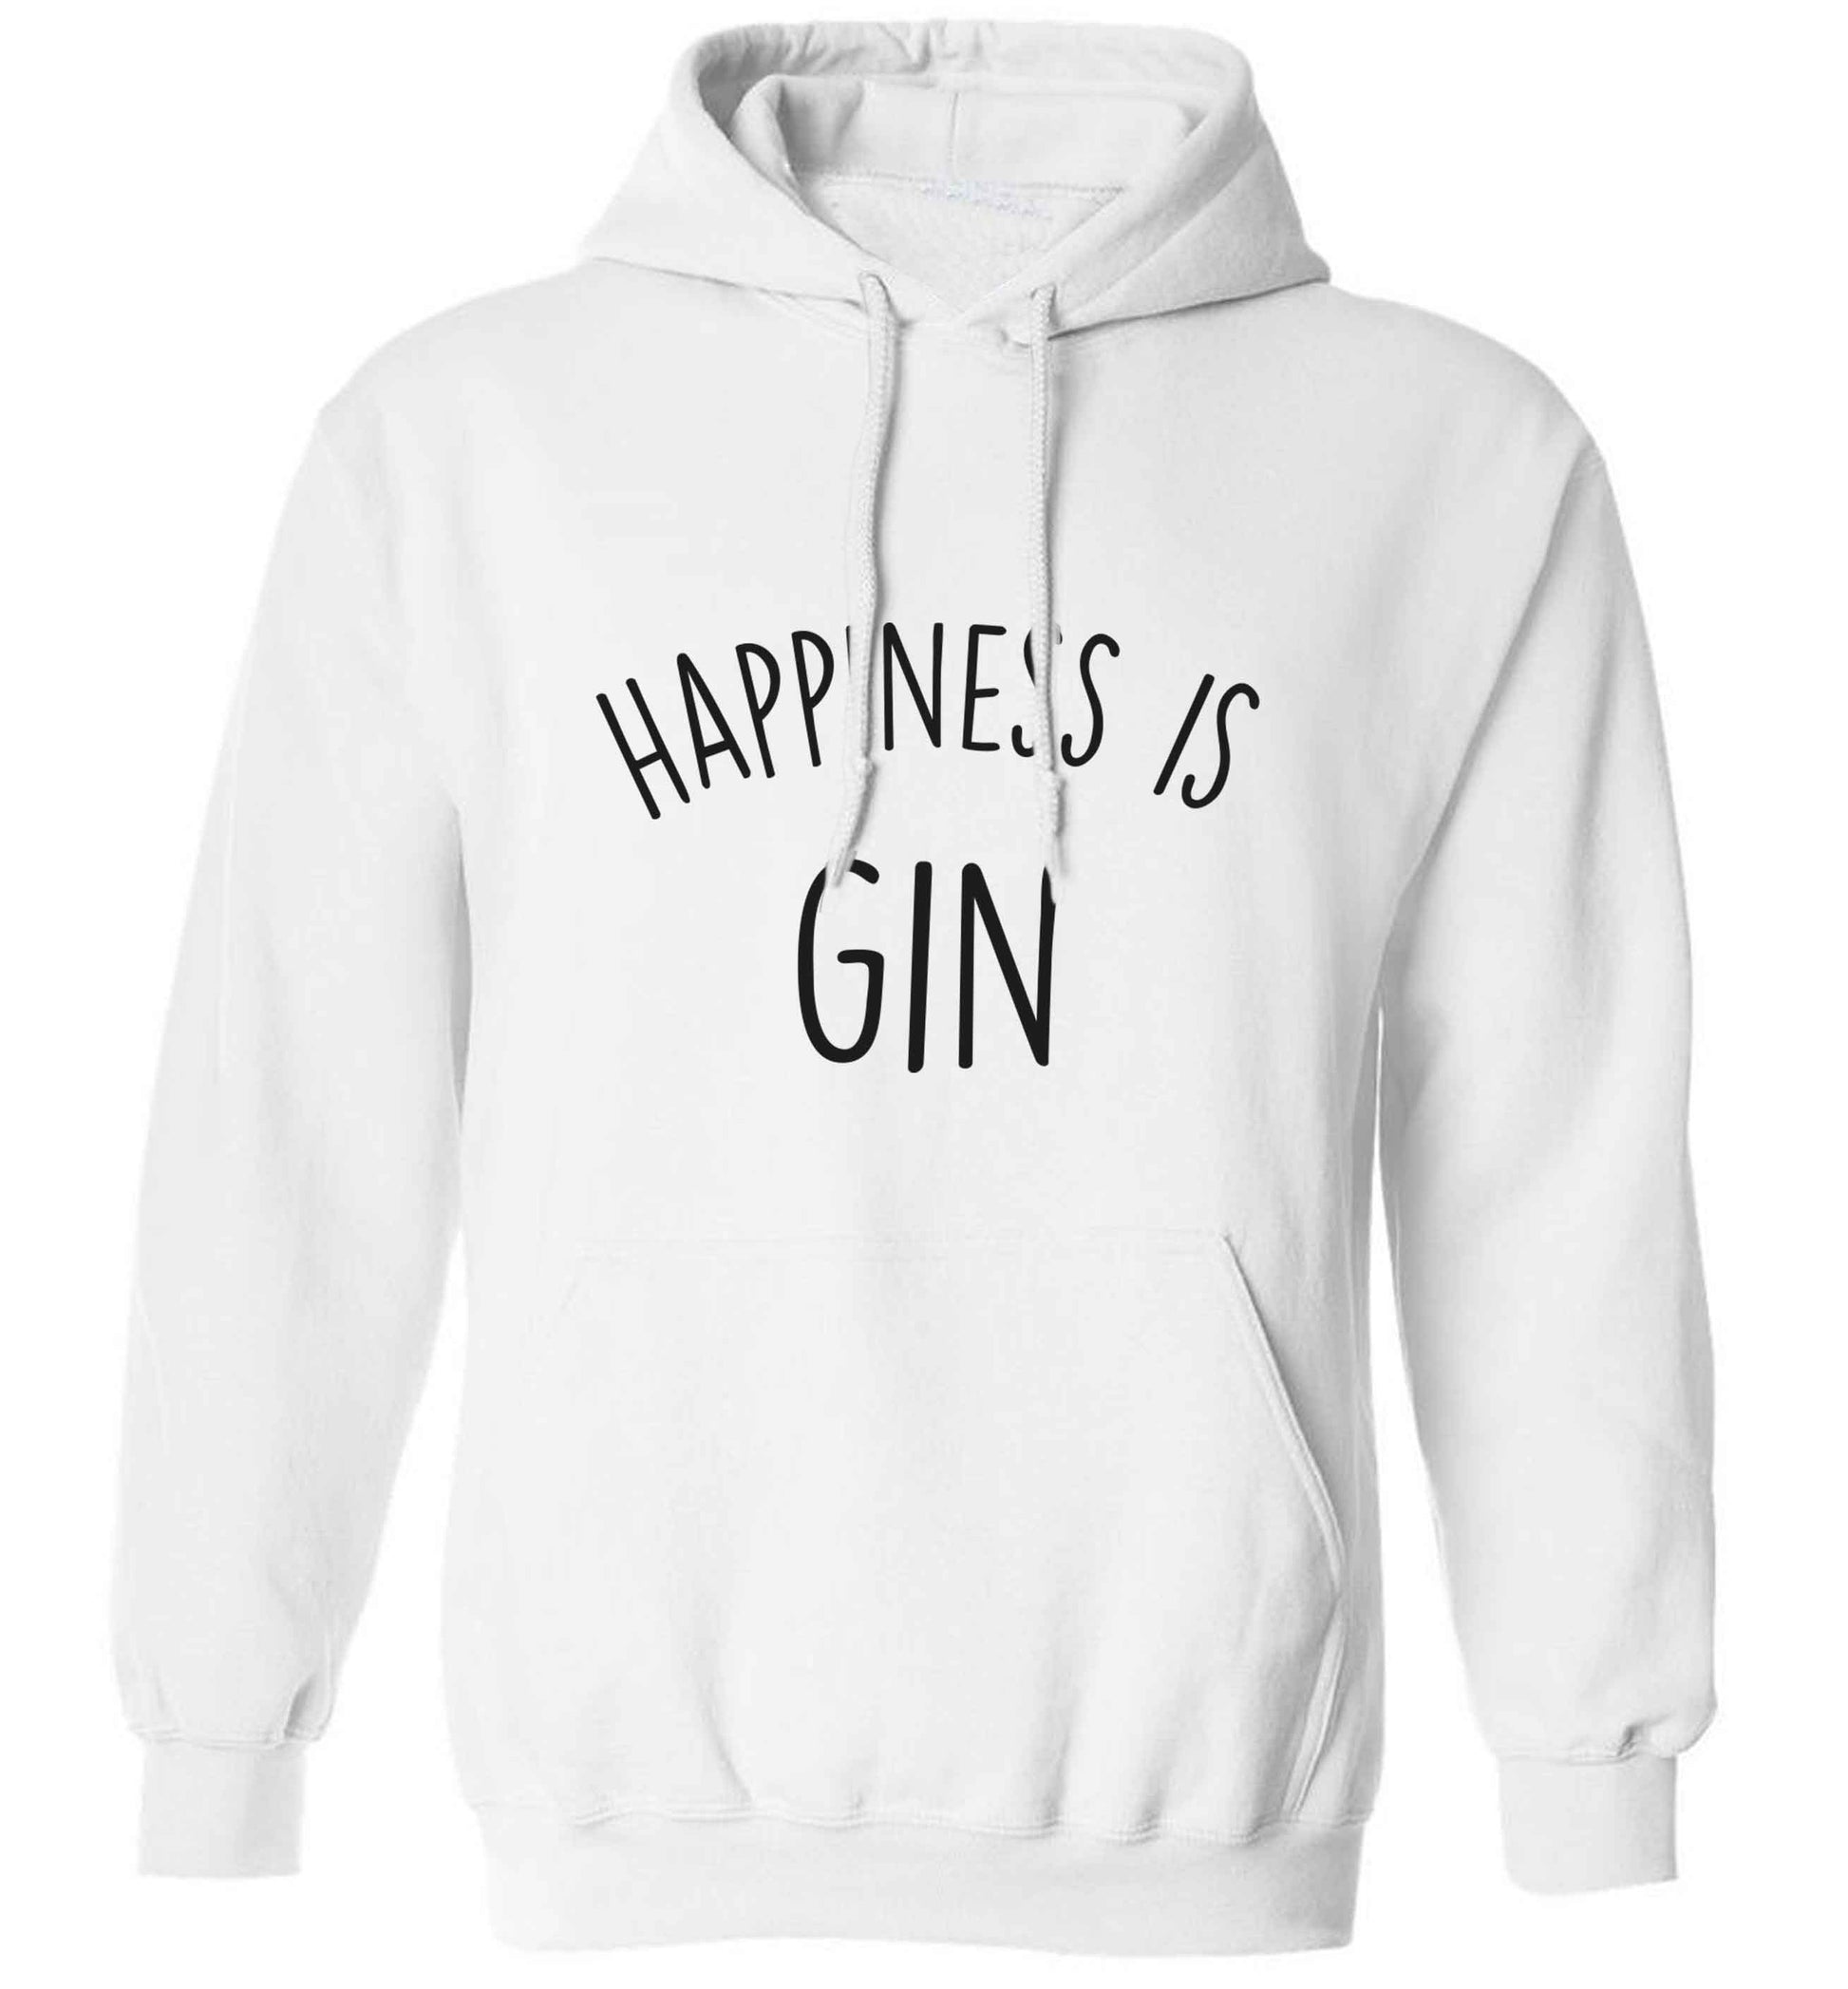 Happiness is gin adults unisex white hoodie 2XL